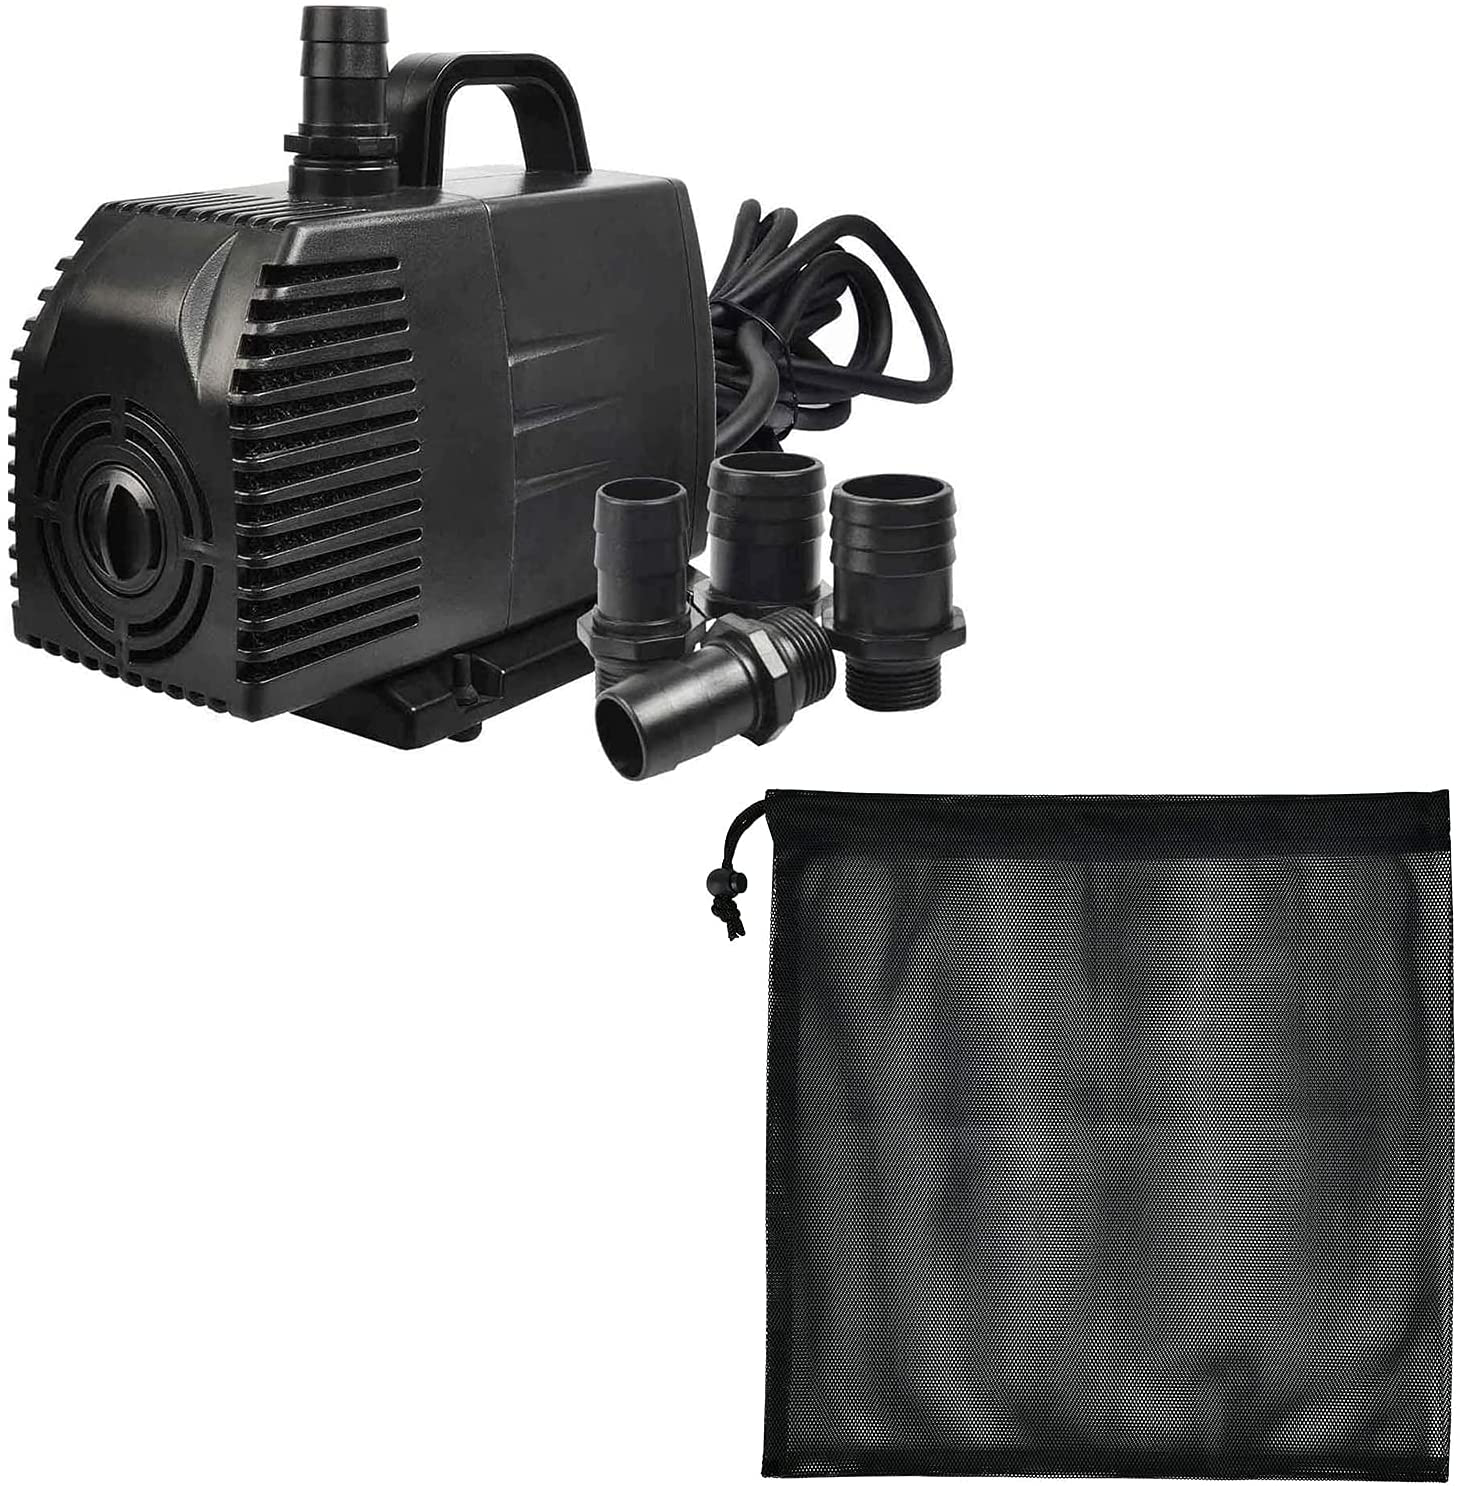 Simple Deluxe 1056 GPH Submersible Pump with 15' Cord, Water Pump for Fish Tank, Hydroponics, Aquaponics, Fountains, Ponds, Statuary, Aquariums & Inline